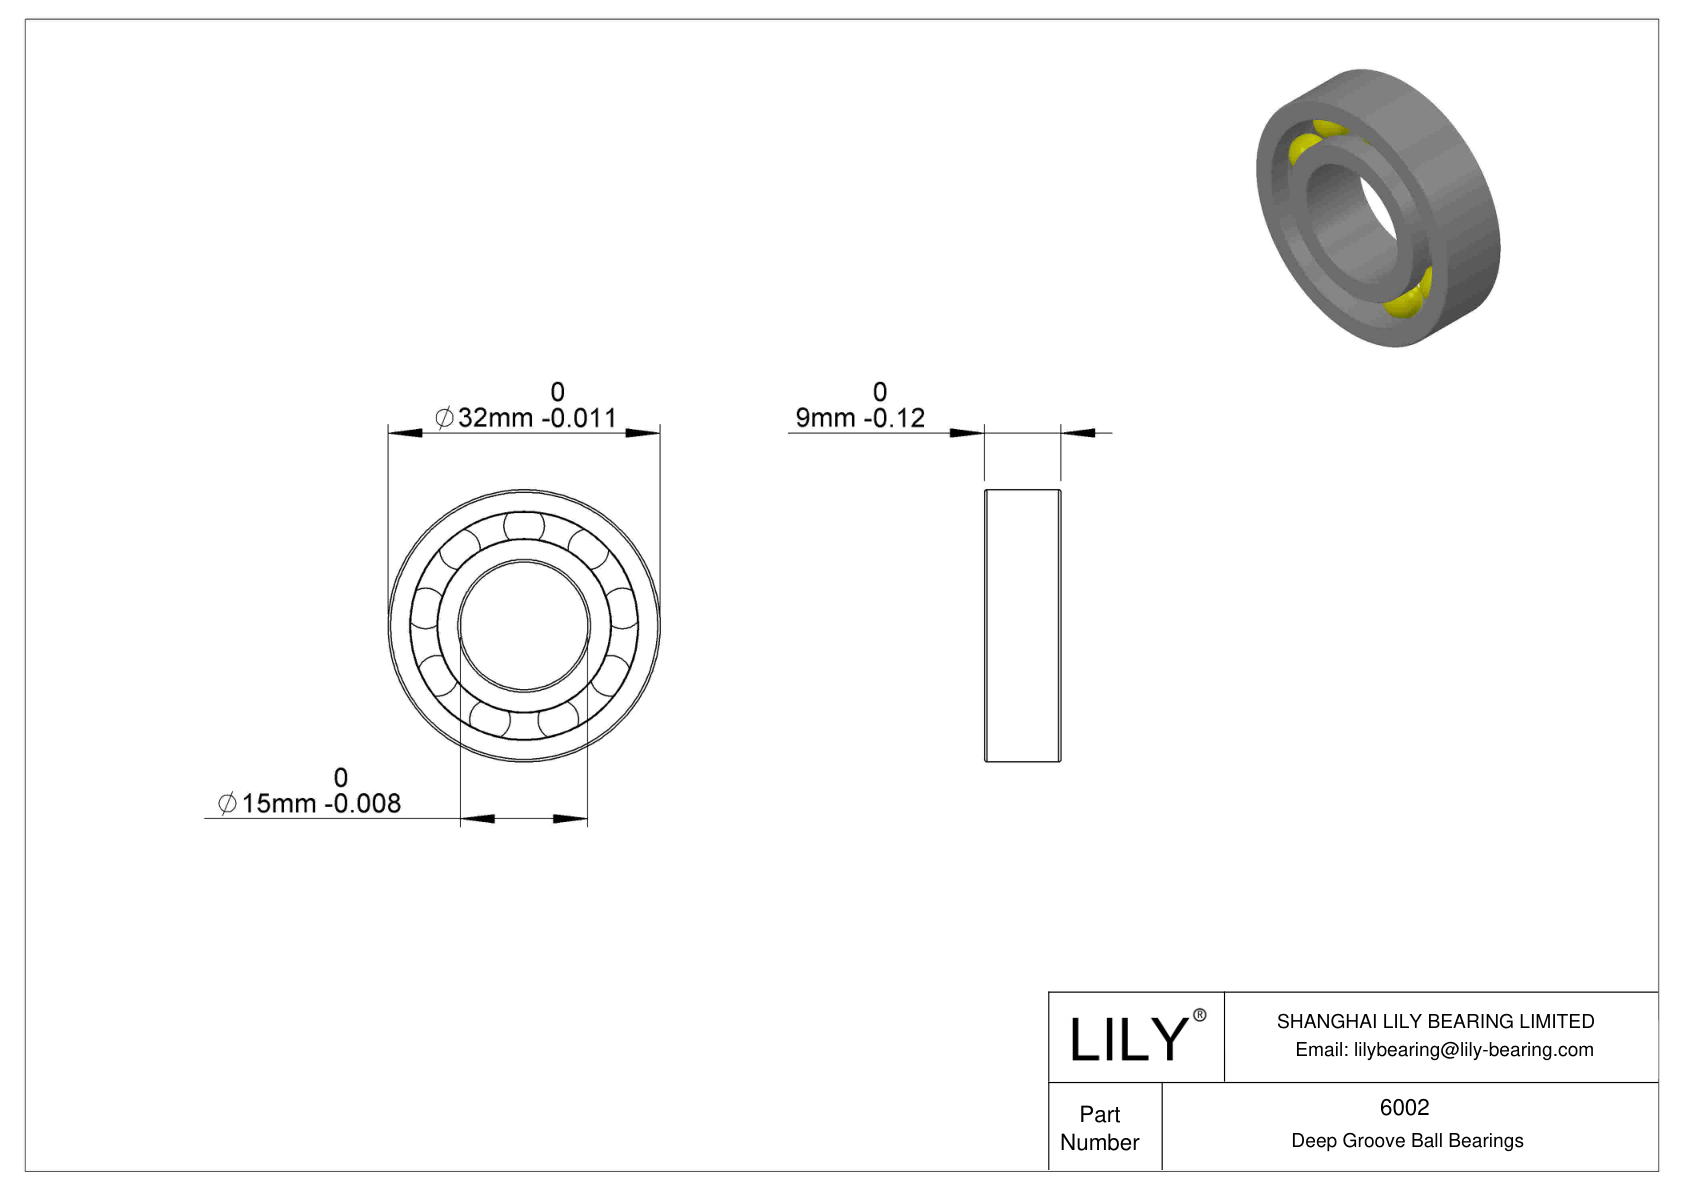 LILY-PU600250-15C2L12M10 Polyurethane Coated Bearing With Screw cad drawing